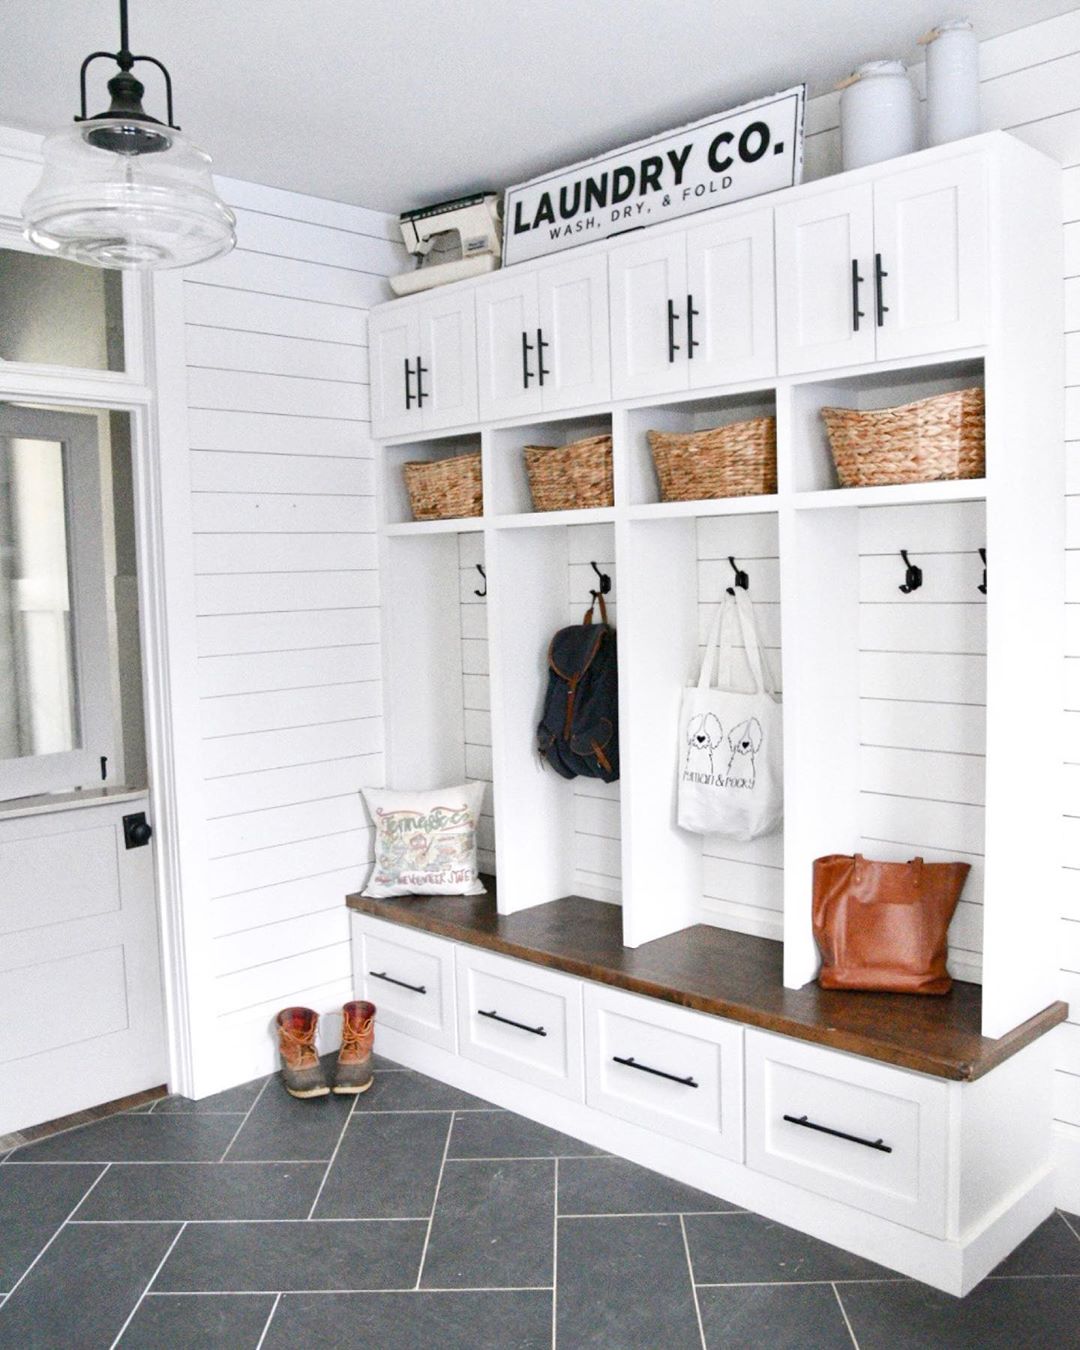 refurbished mudroom with new tile floors and white cabinets with black pulls photo by Instagram user @brunoandlibby